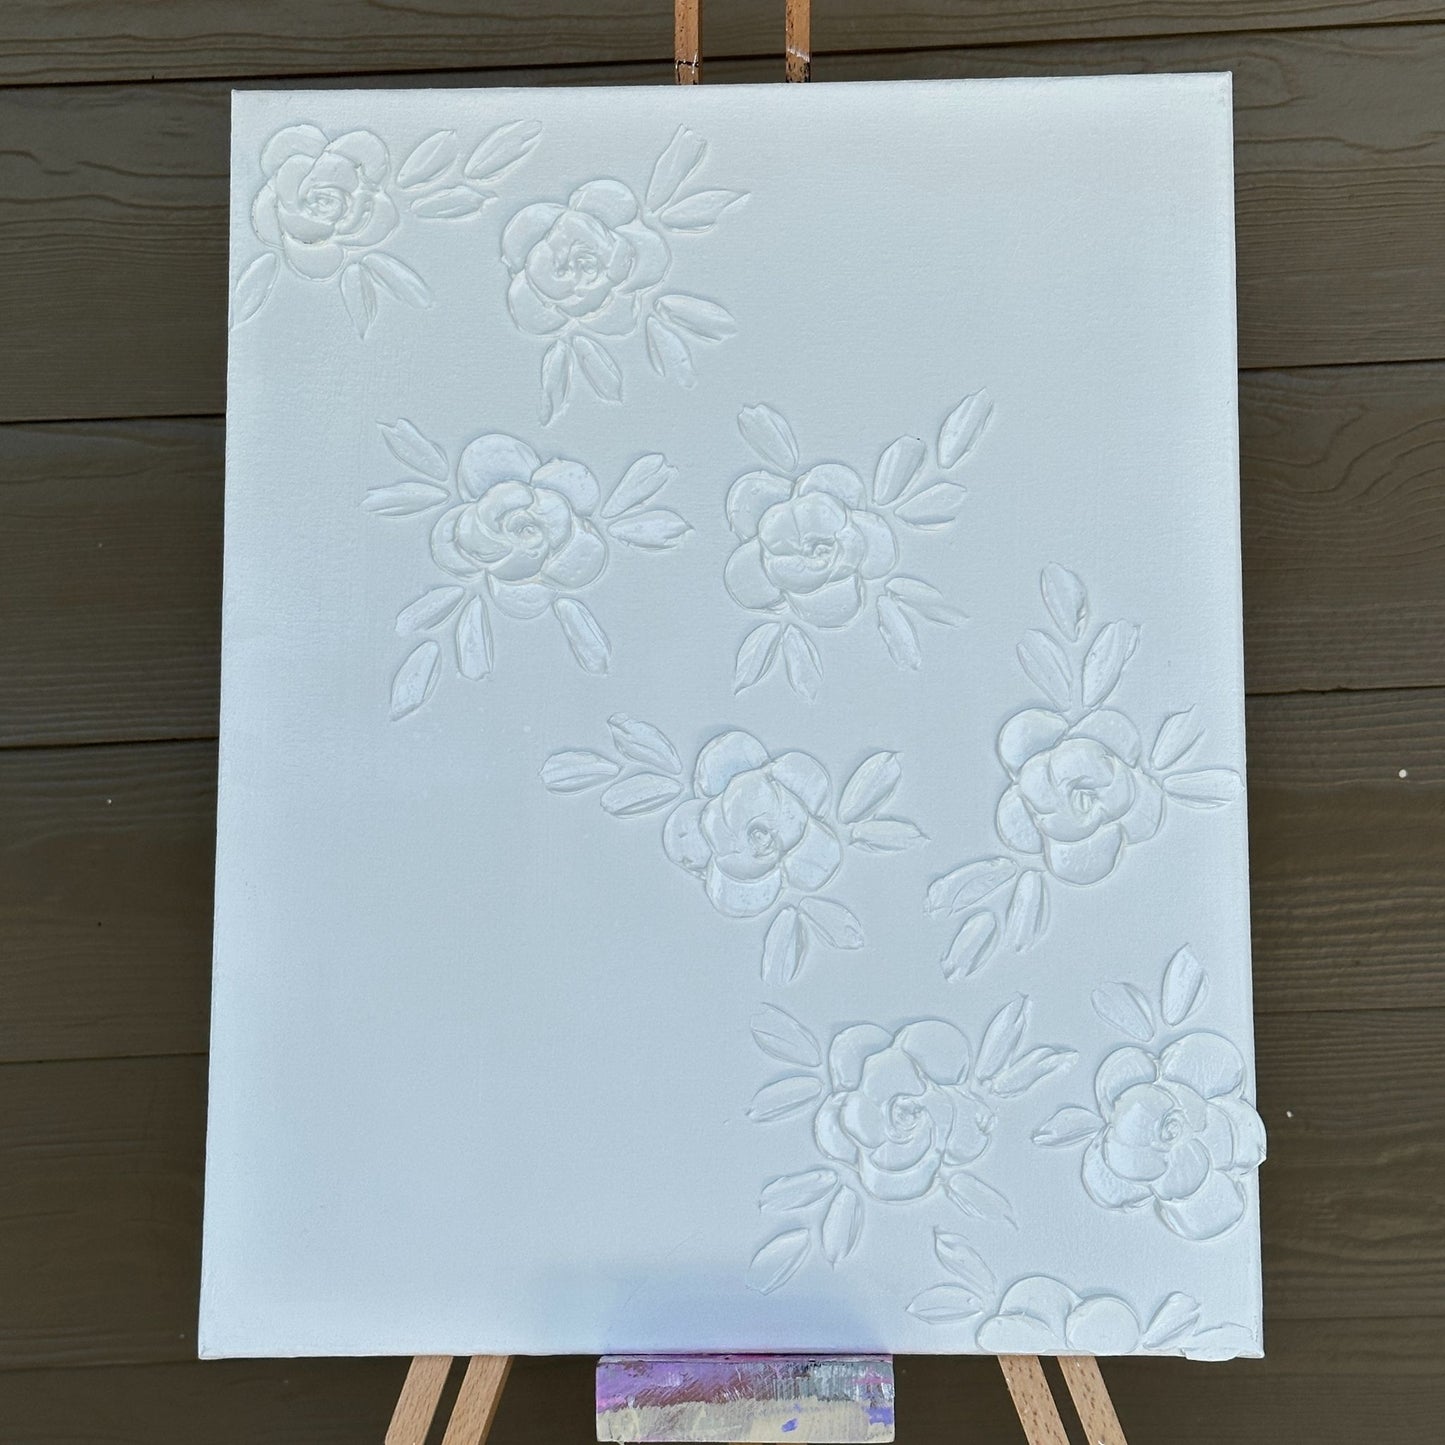 3D Texture White Roses on White Canvas 16"x20"